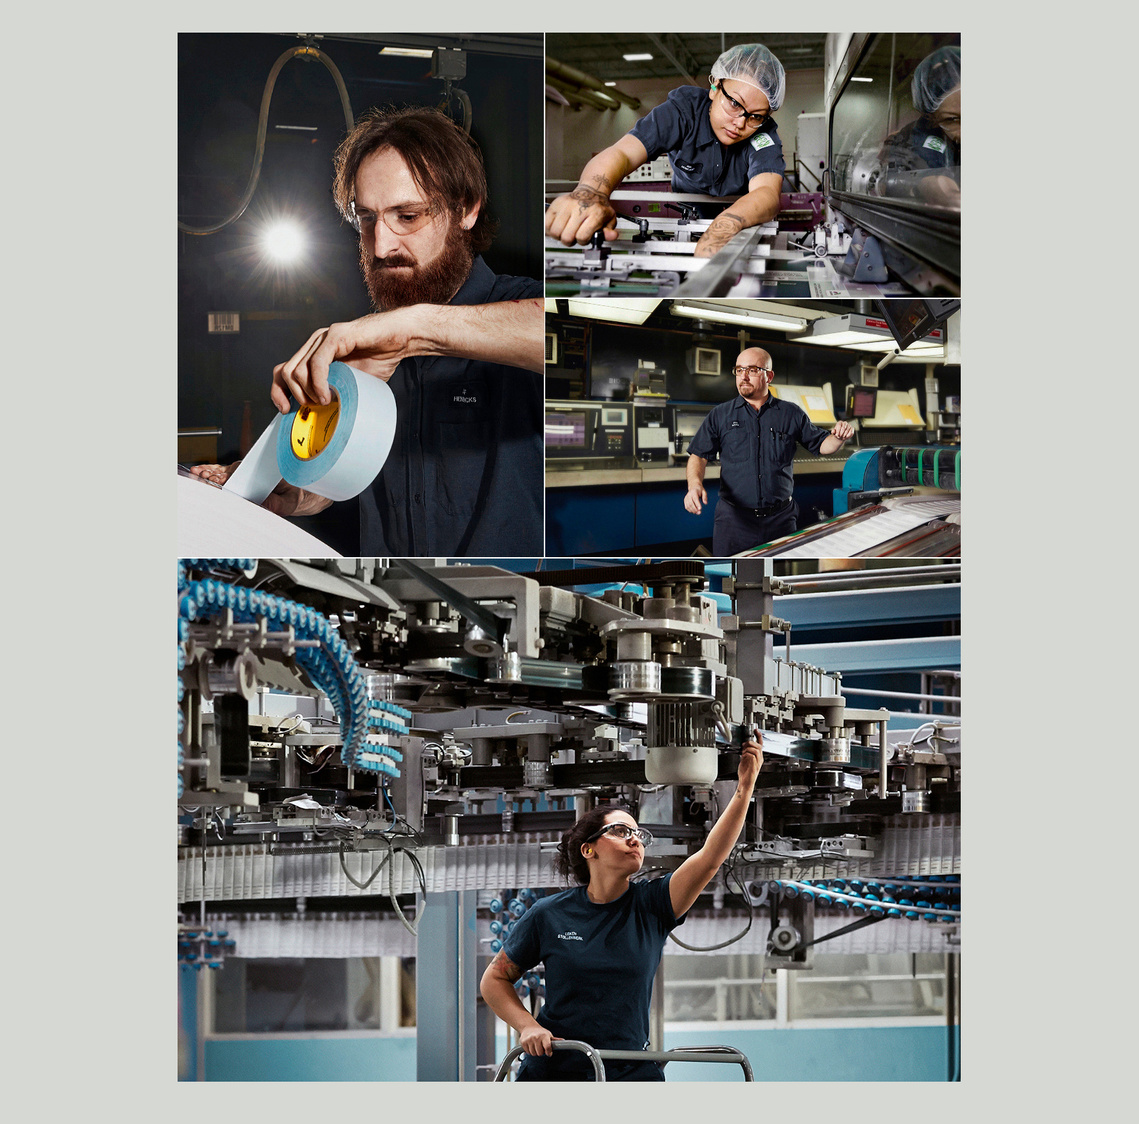 Industrial manufacturing photographer based in Madison, Wisconsin.